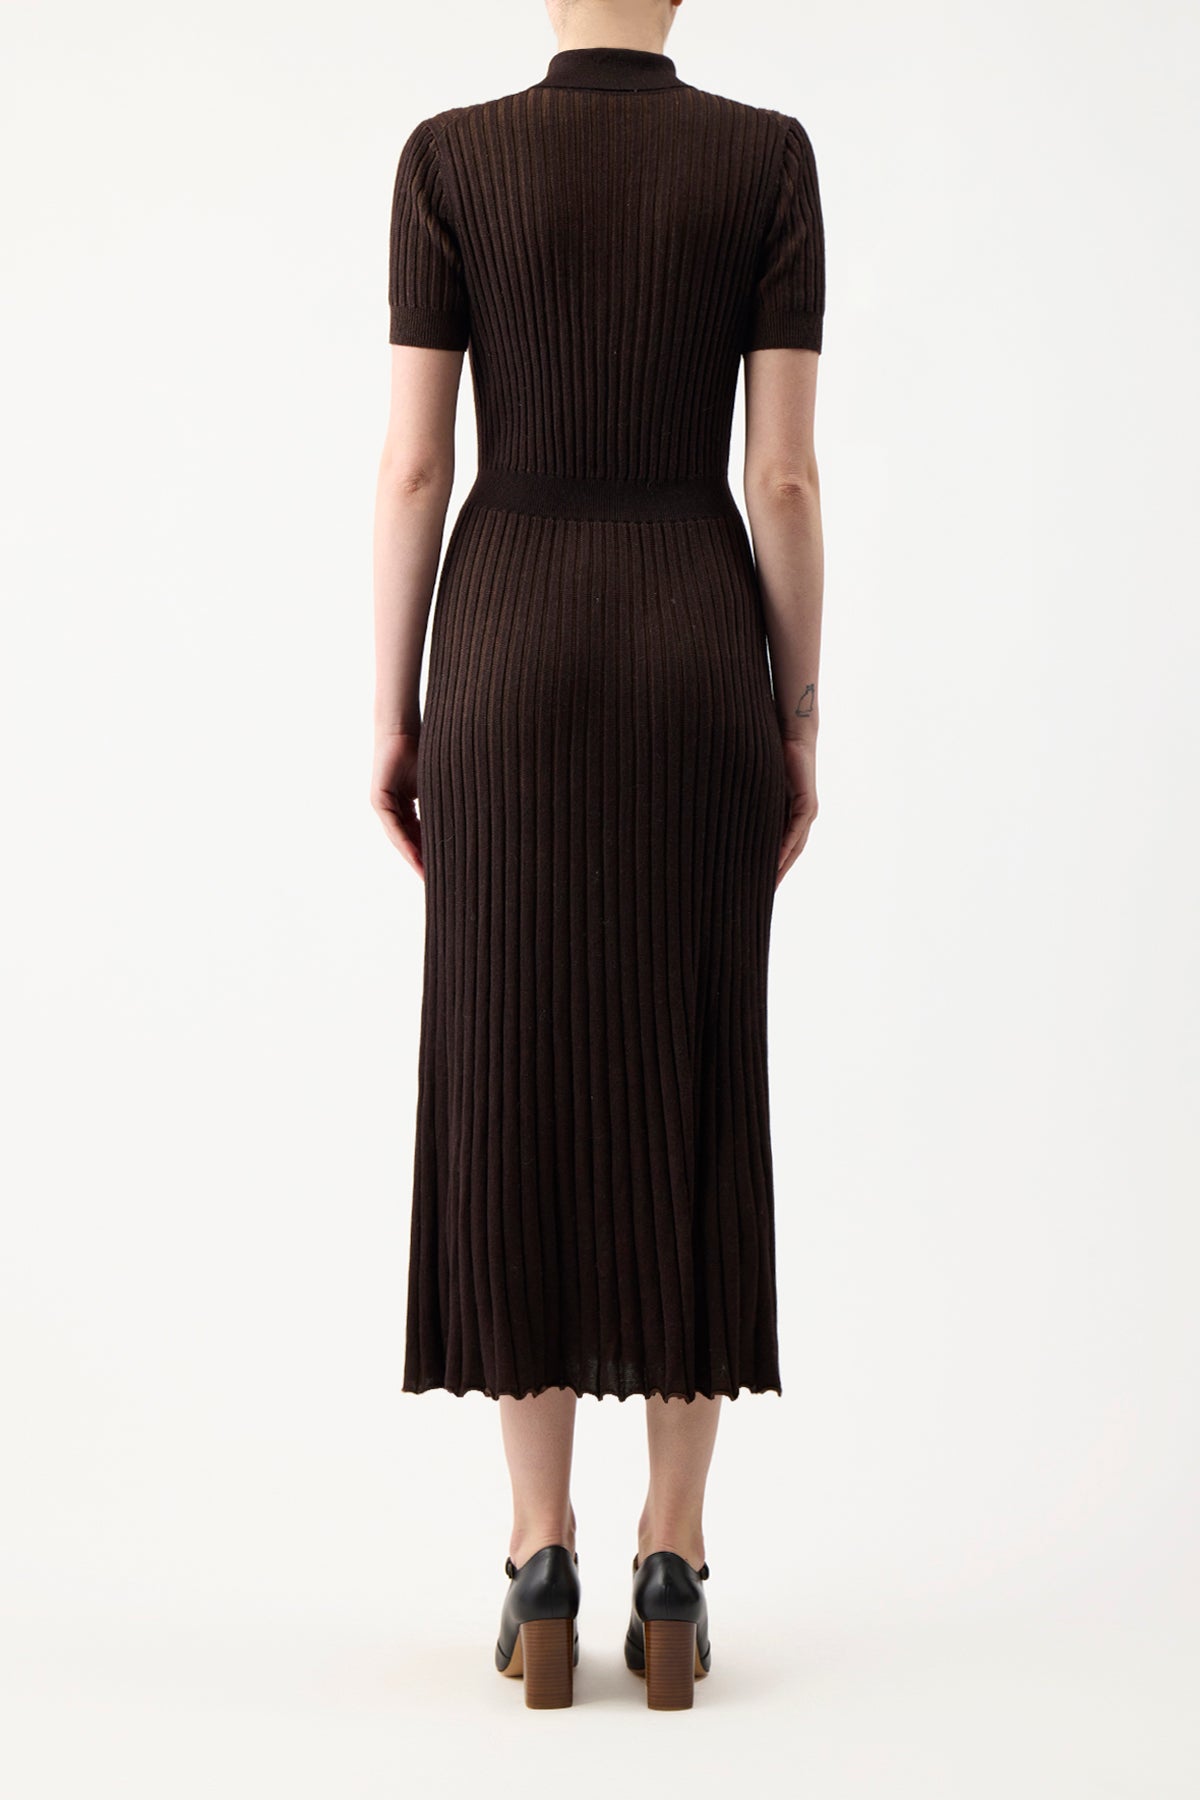 Amor Knit Dress in Chocolate Cashmere Silk